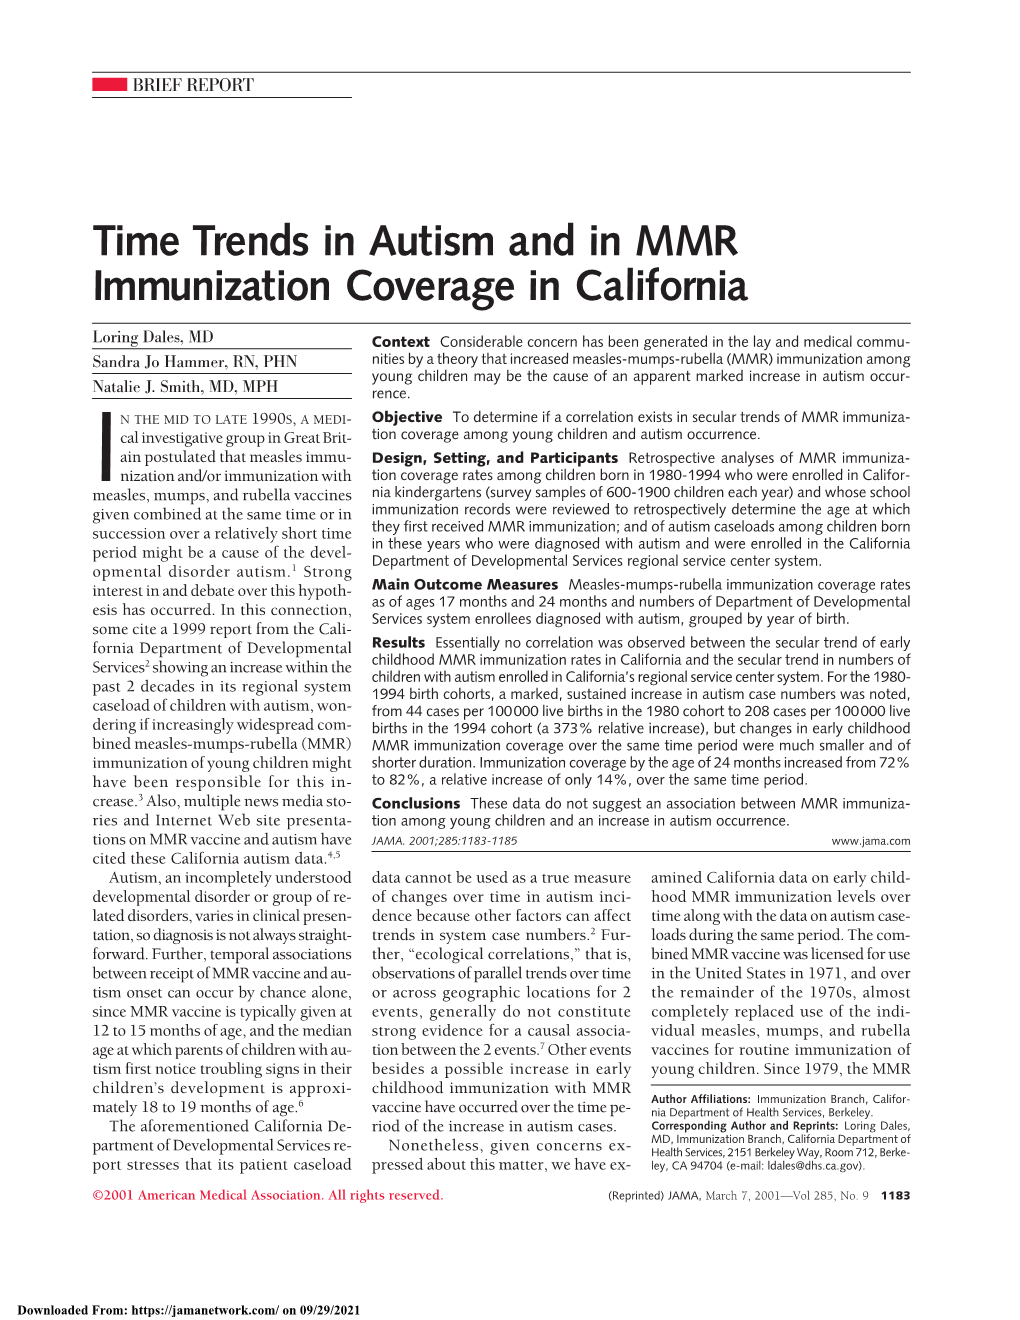 Time Trends in Autism and in MMR Immunization Coverage in California